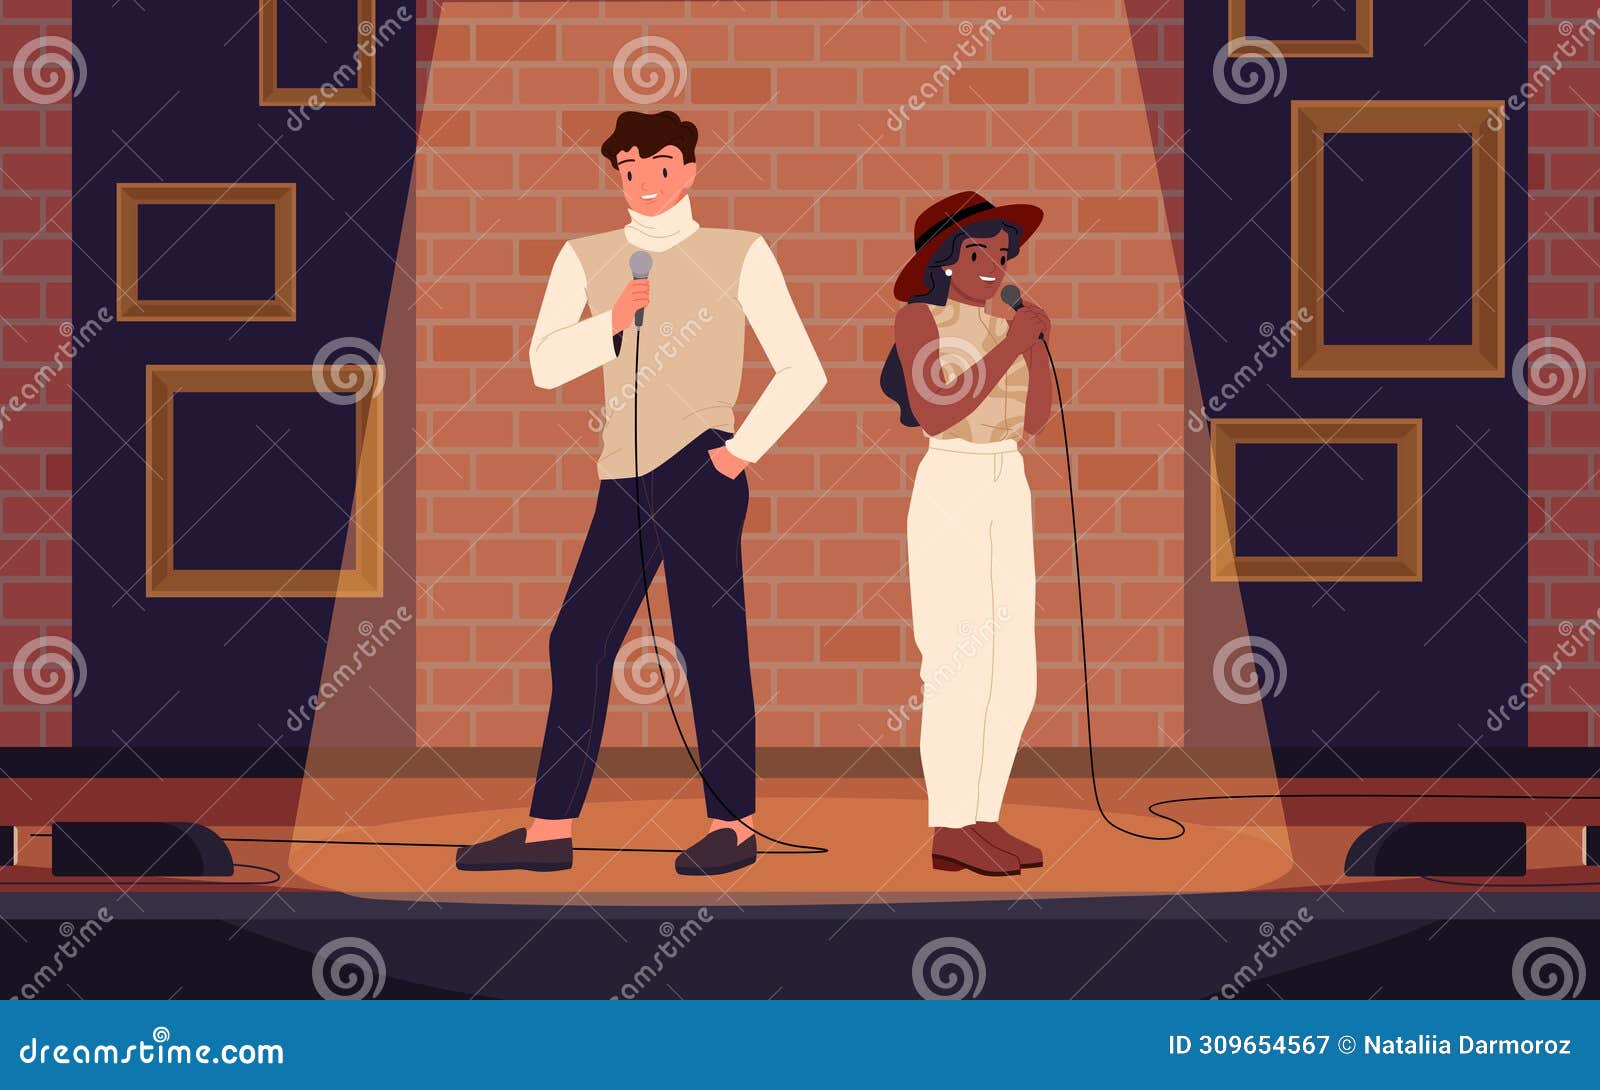 two talent artists standing on theater stage in spotlight with brick wall, people holding microphones for jokes contest